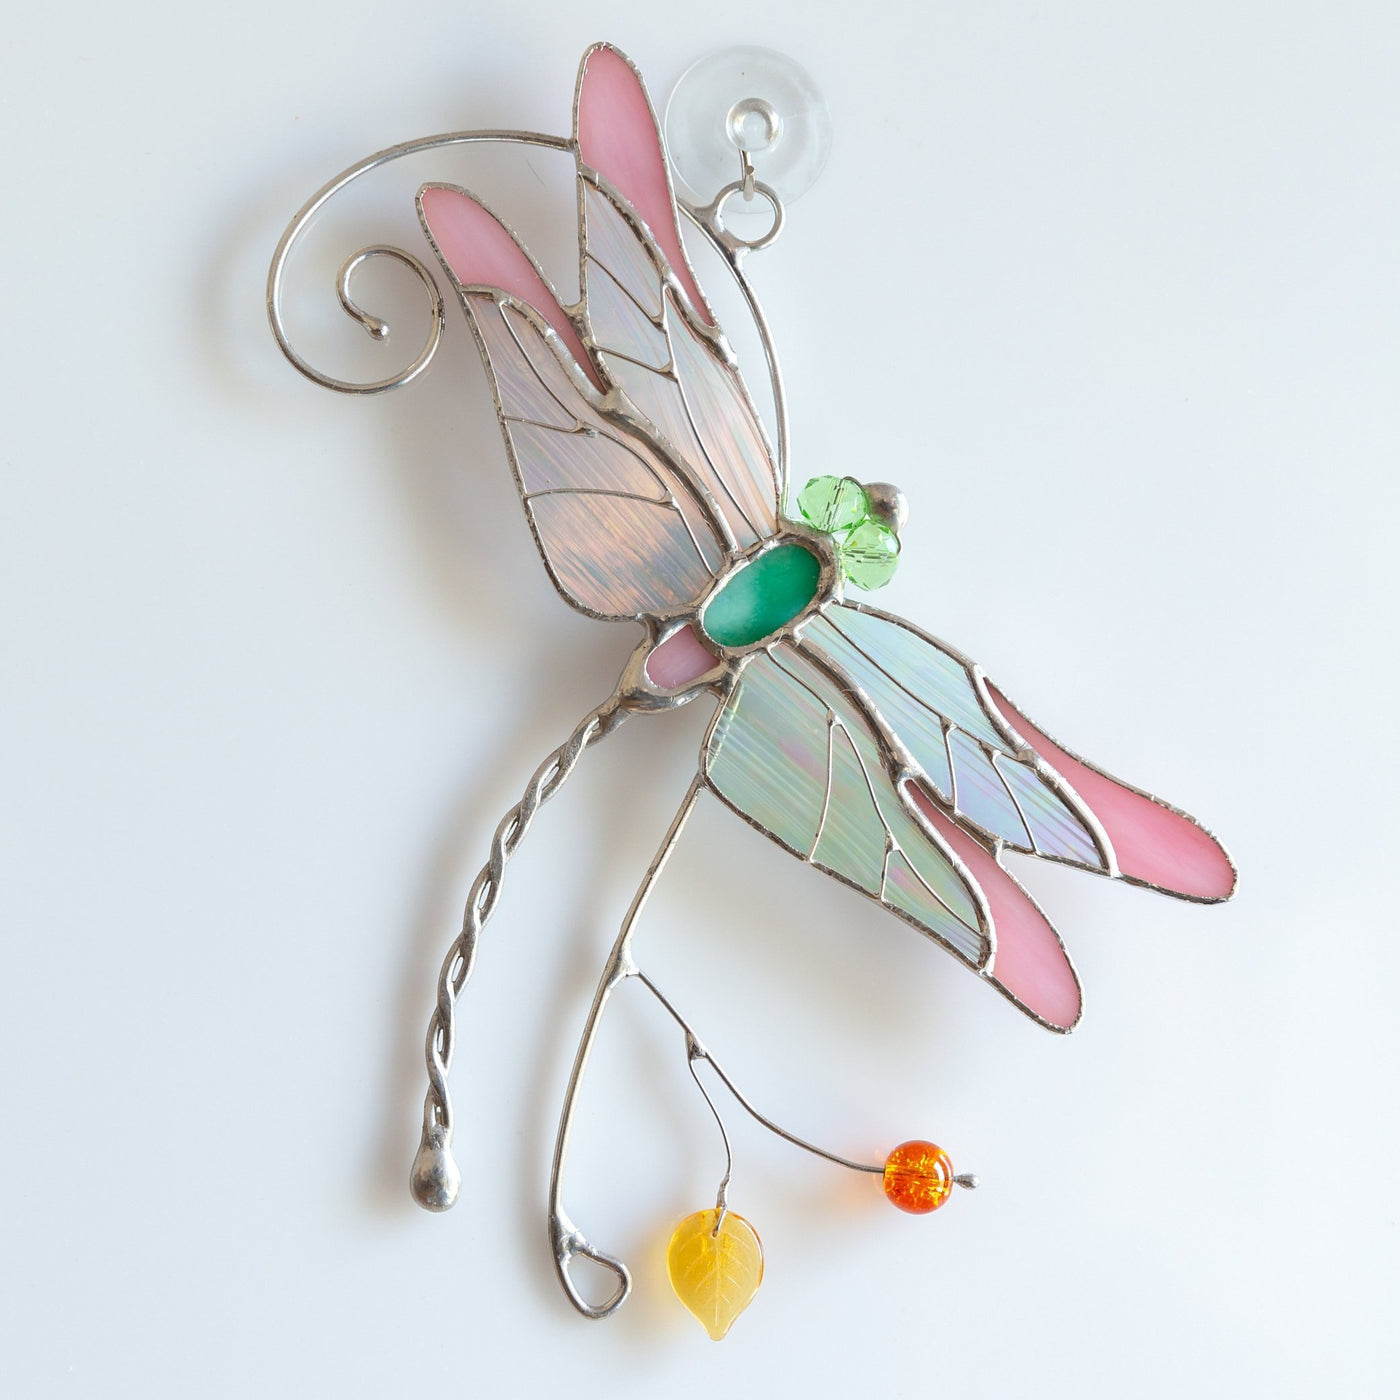 Pink dragonfly with iridescent wings stained glass window hanging